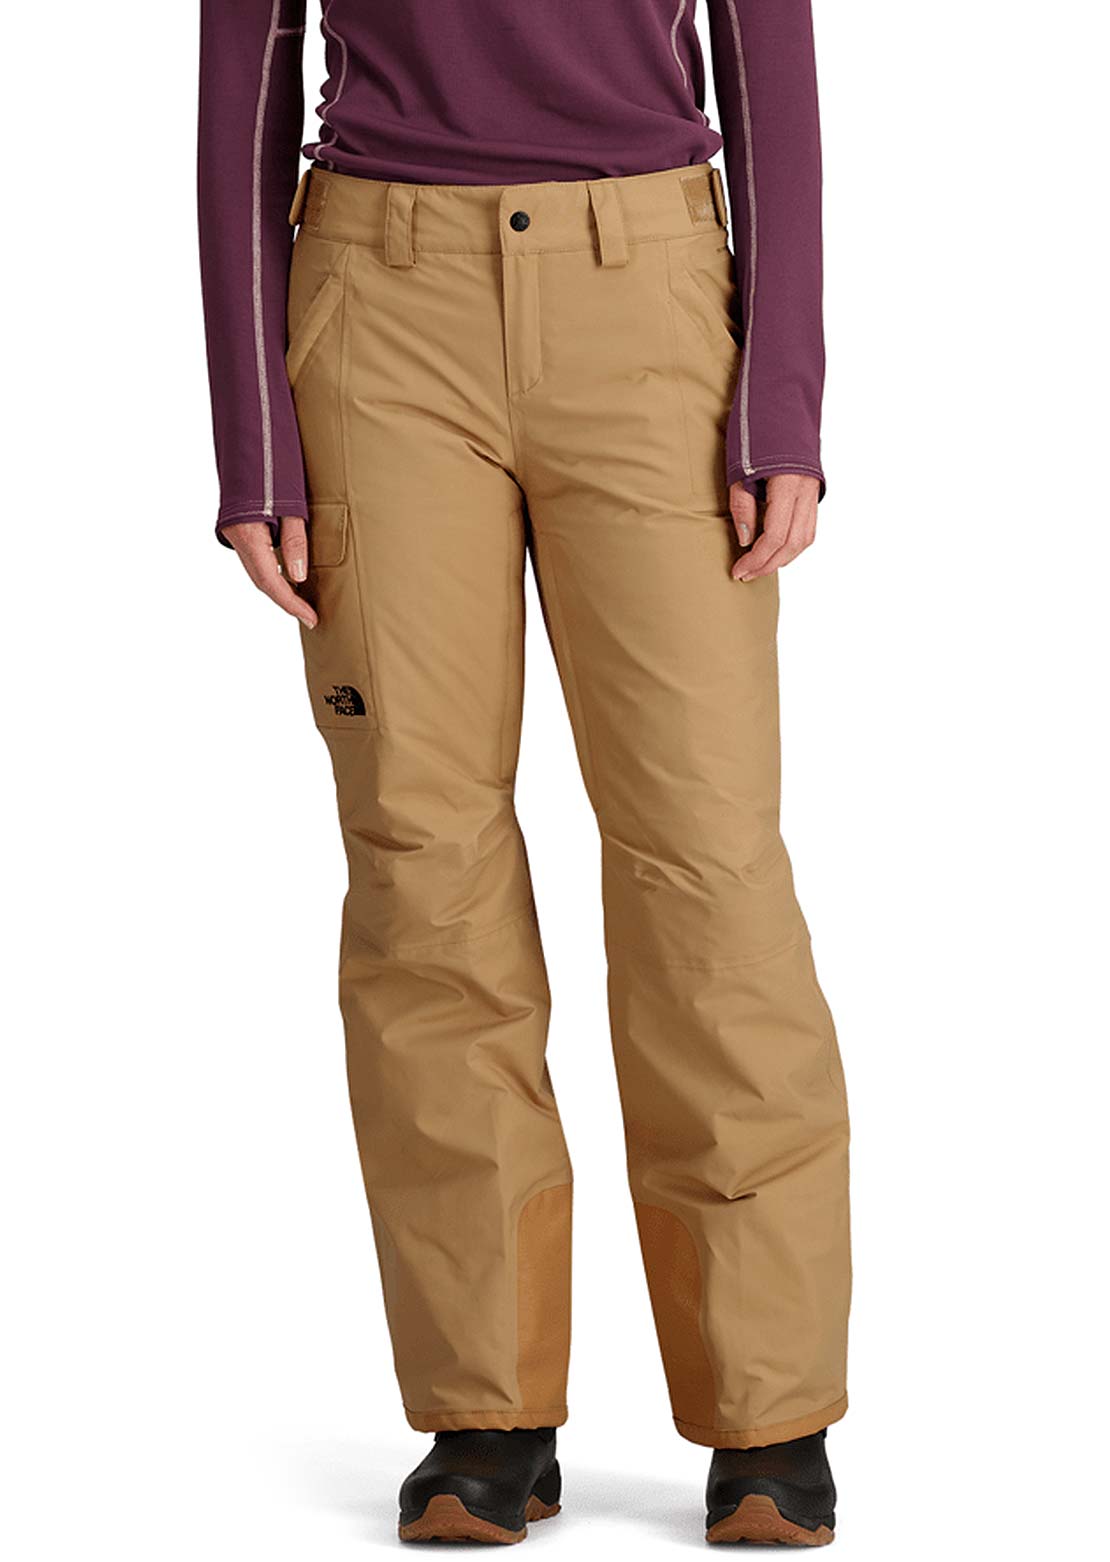 The North Face Freedom Insulated Pant - Ski Trousers Girls, Buy online